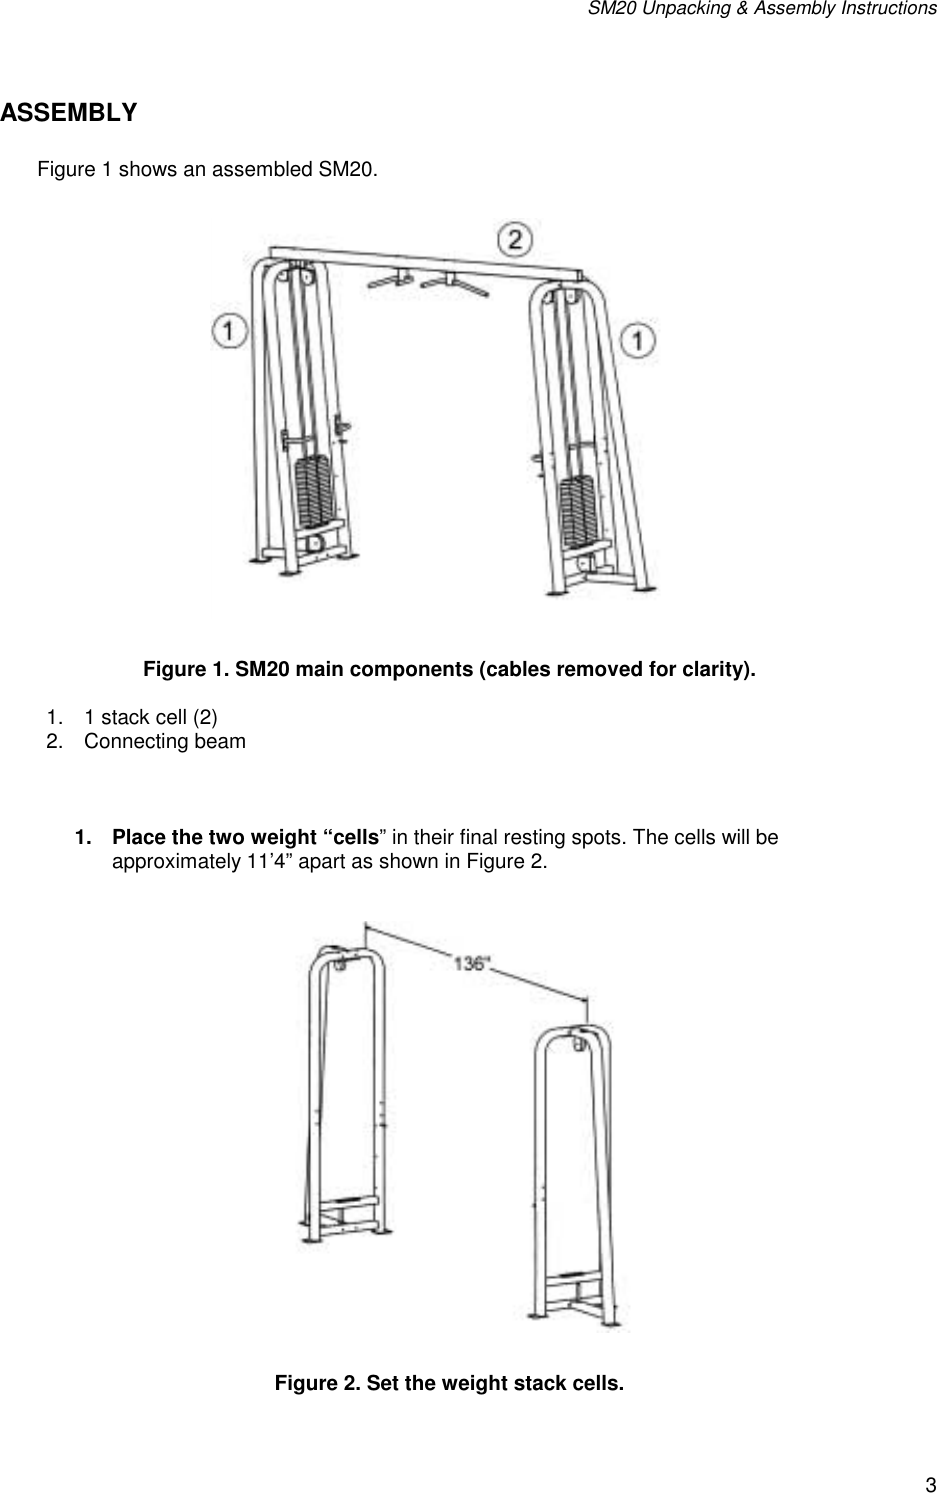 Page 3 of 7 - Life-Fitness Life-Fitness-Pro-9000-Series-Users-Manual- The Smith Machine Comes Disassembled In A Large Packing Crate  Life-fitness-pro-9000-series-users-manual